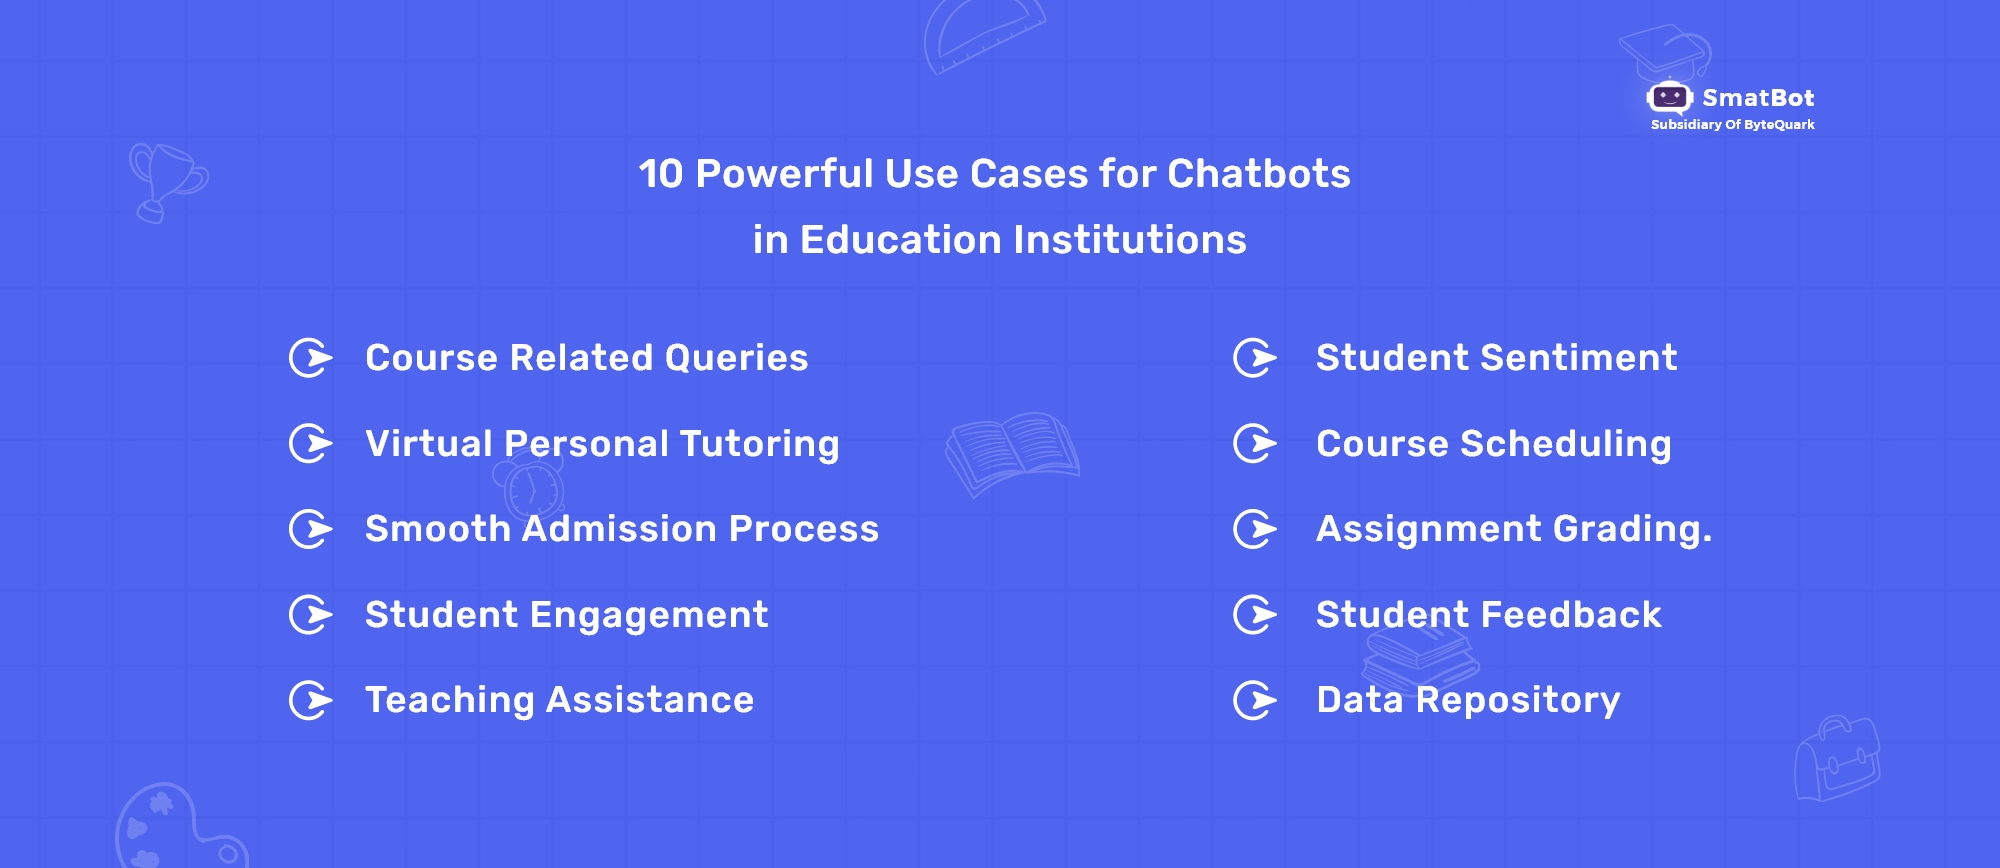 Use Cases for Chatbots in Education Institutions  